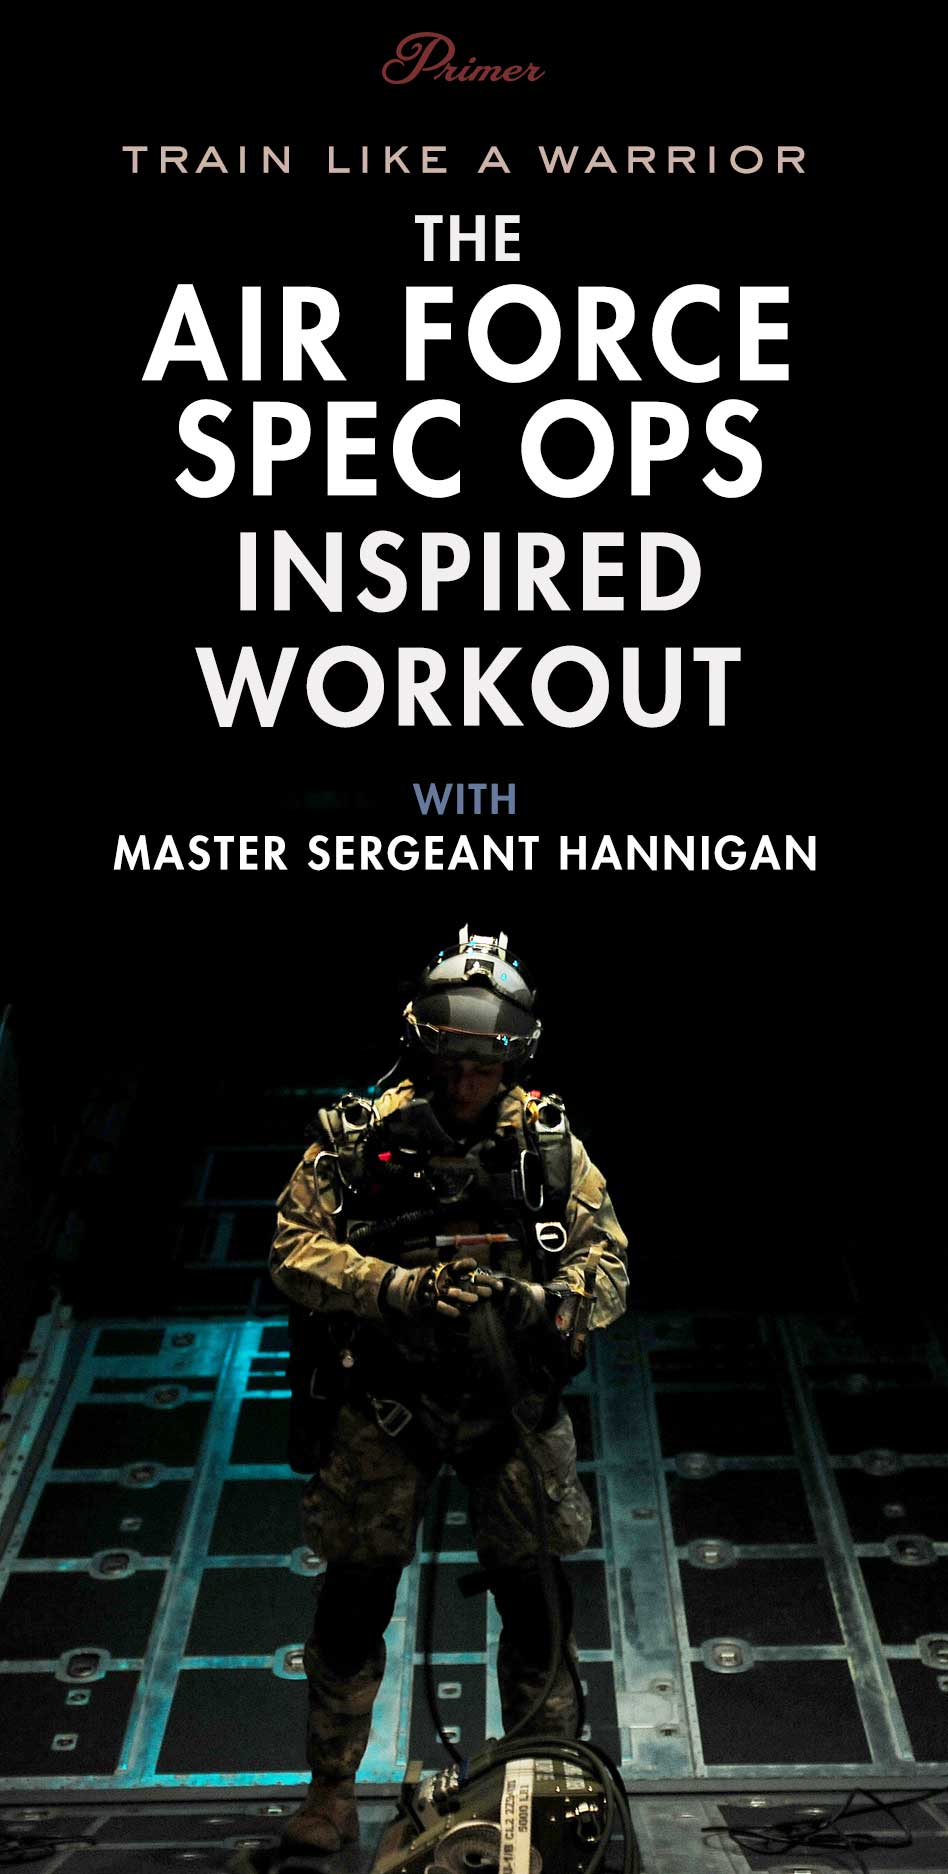 The Air Force Special Ops Workout with Master Sergeant Hannigan